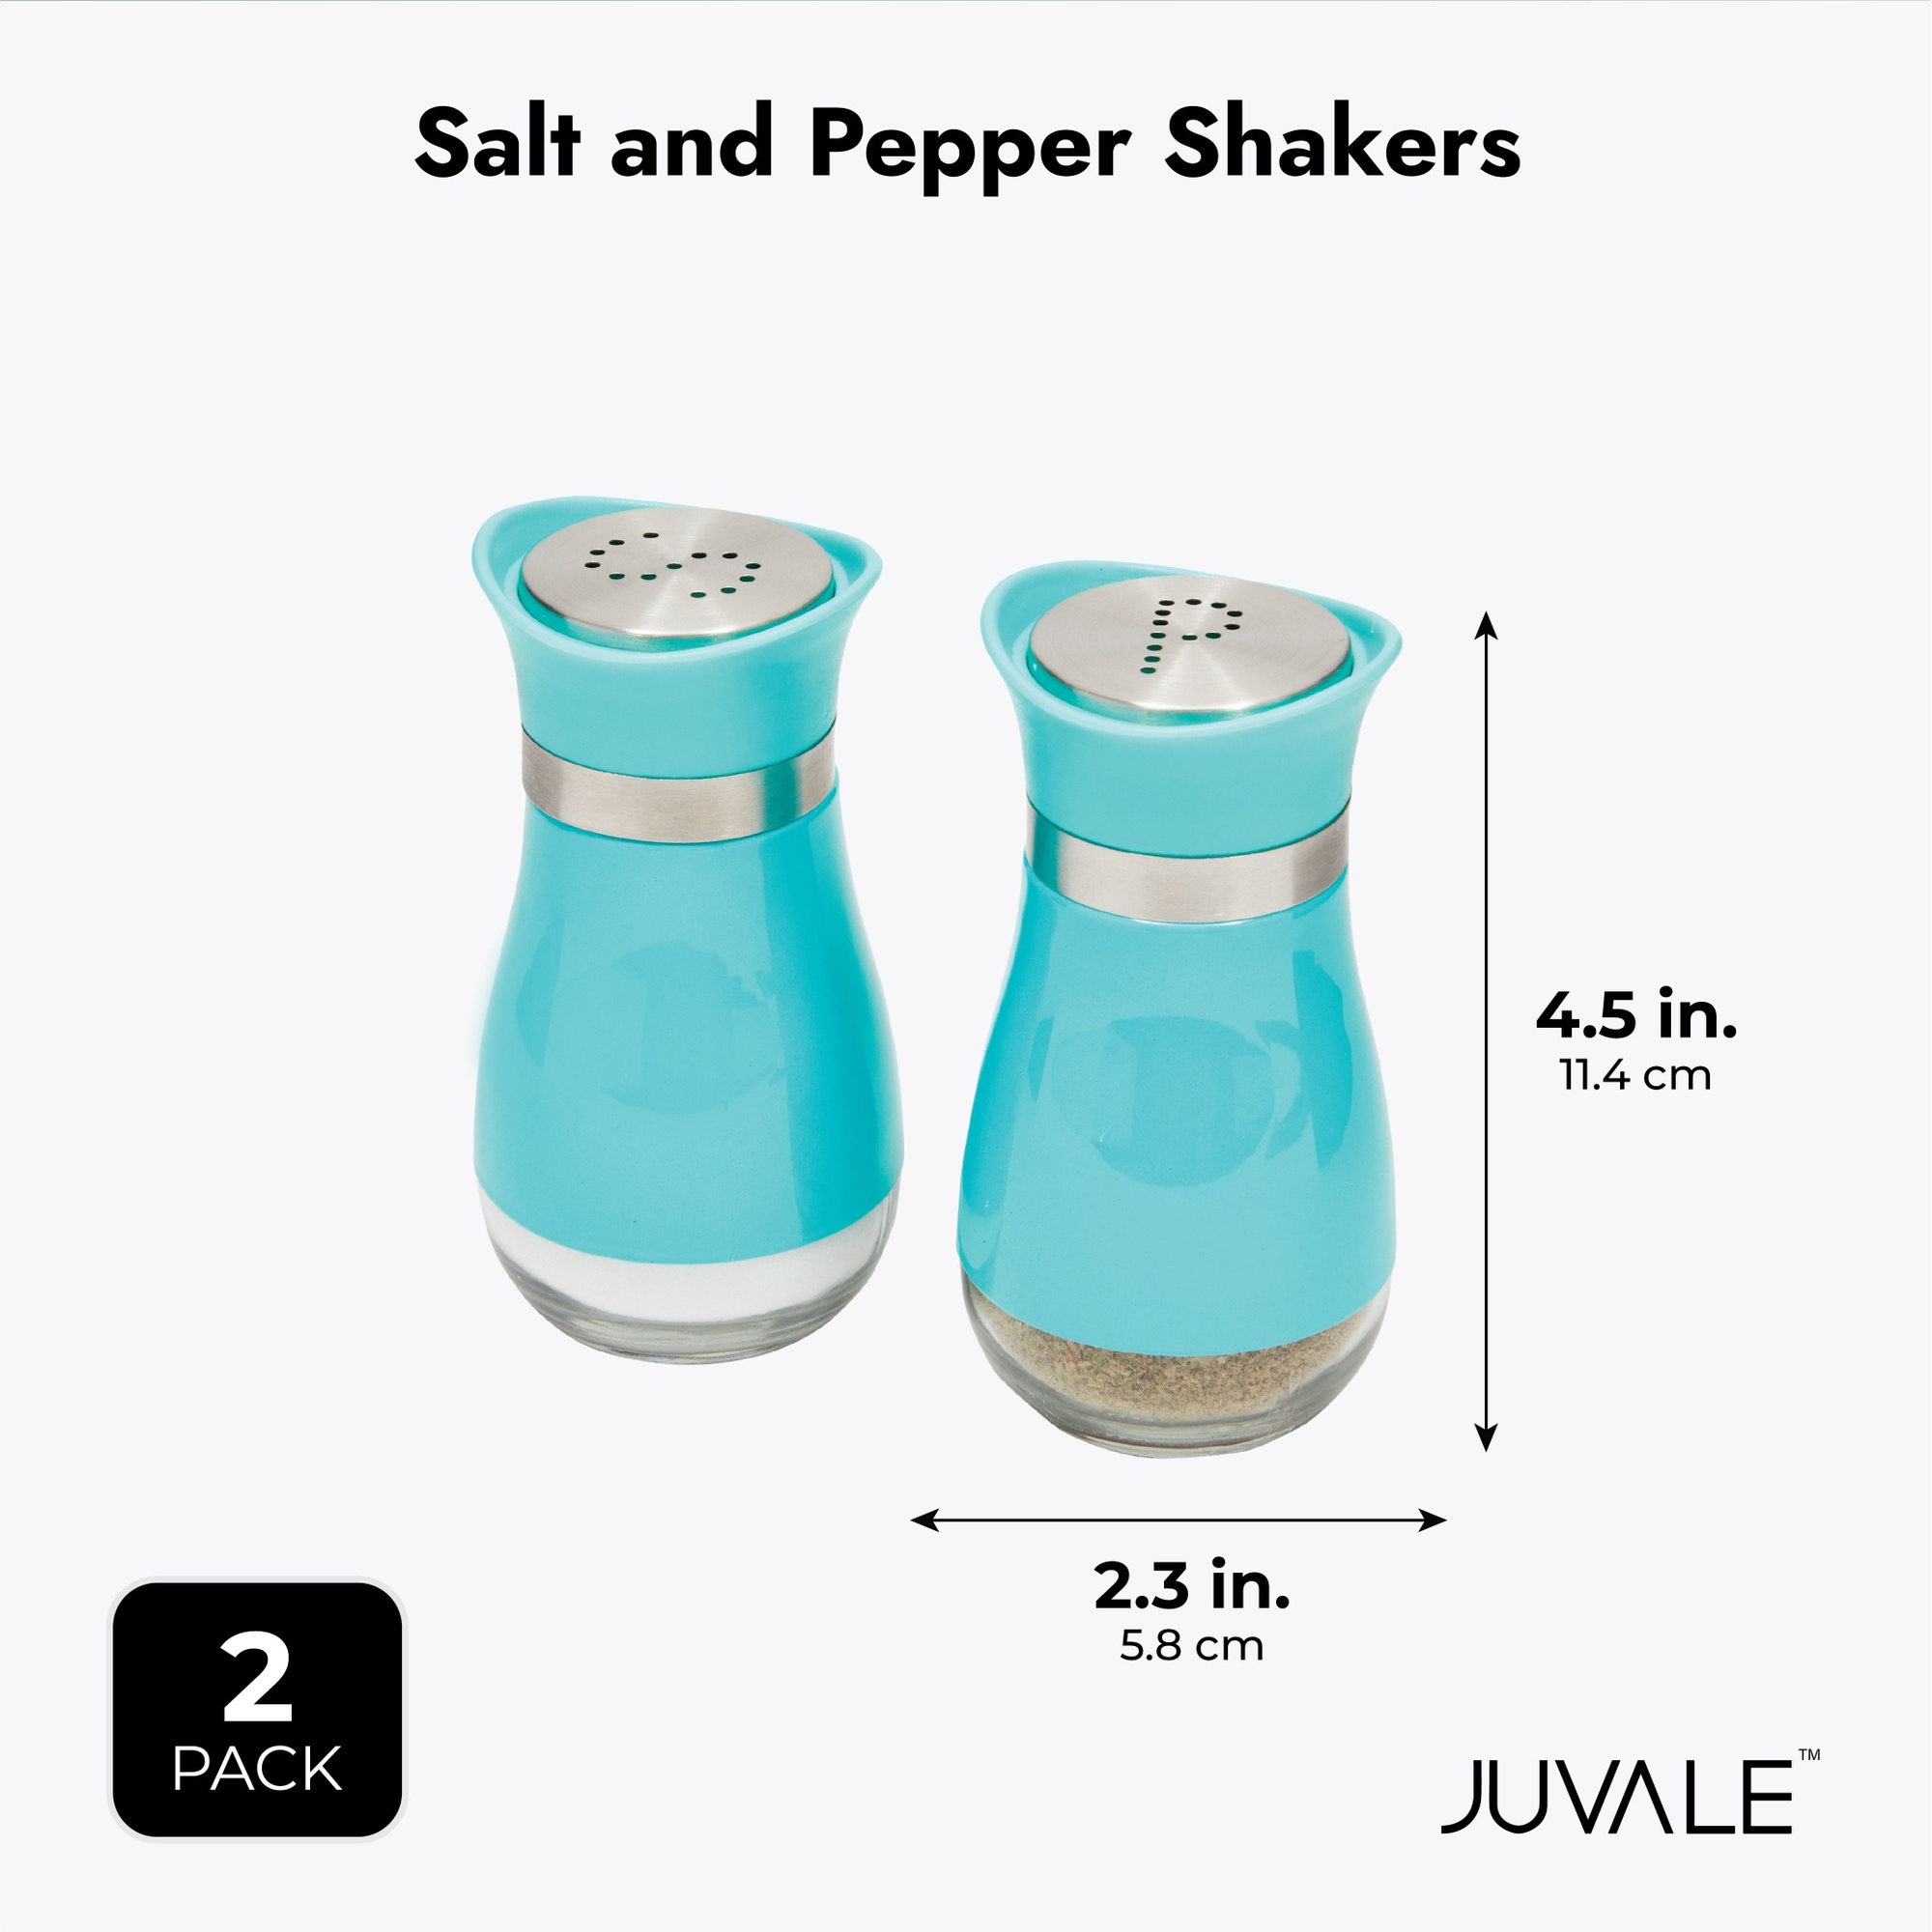 https://ak1.ostkcdn.com/images/products/is/images/direct/853a9546d0af49b0110f23aed8c122fc38208045/Teal-Salt-and-Pepper-Shakers-with-Glass-Bottom%2C-Stainless-Steel-Refillable-%282-Piece-Set%29.jpg